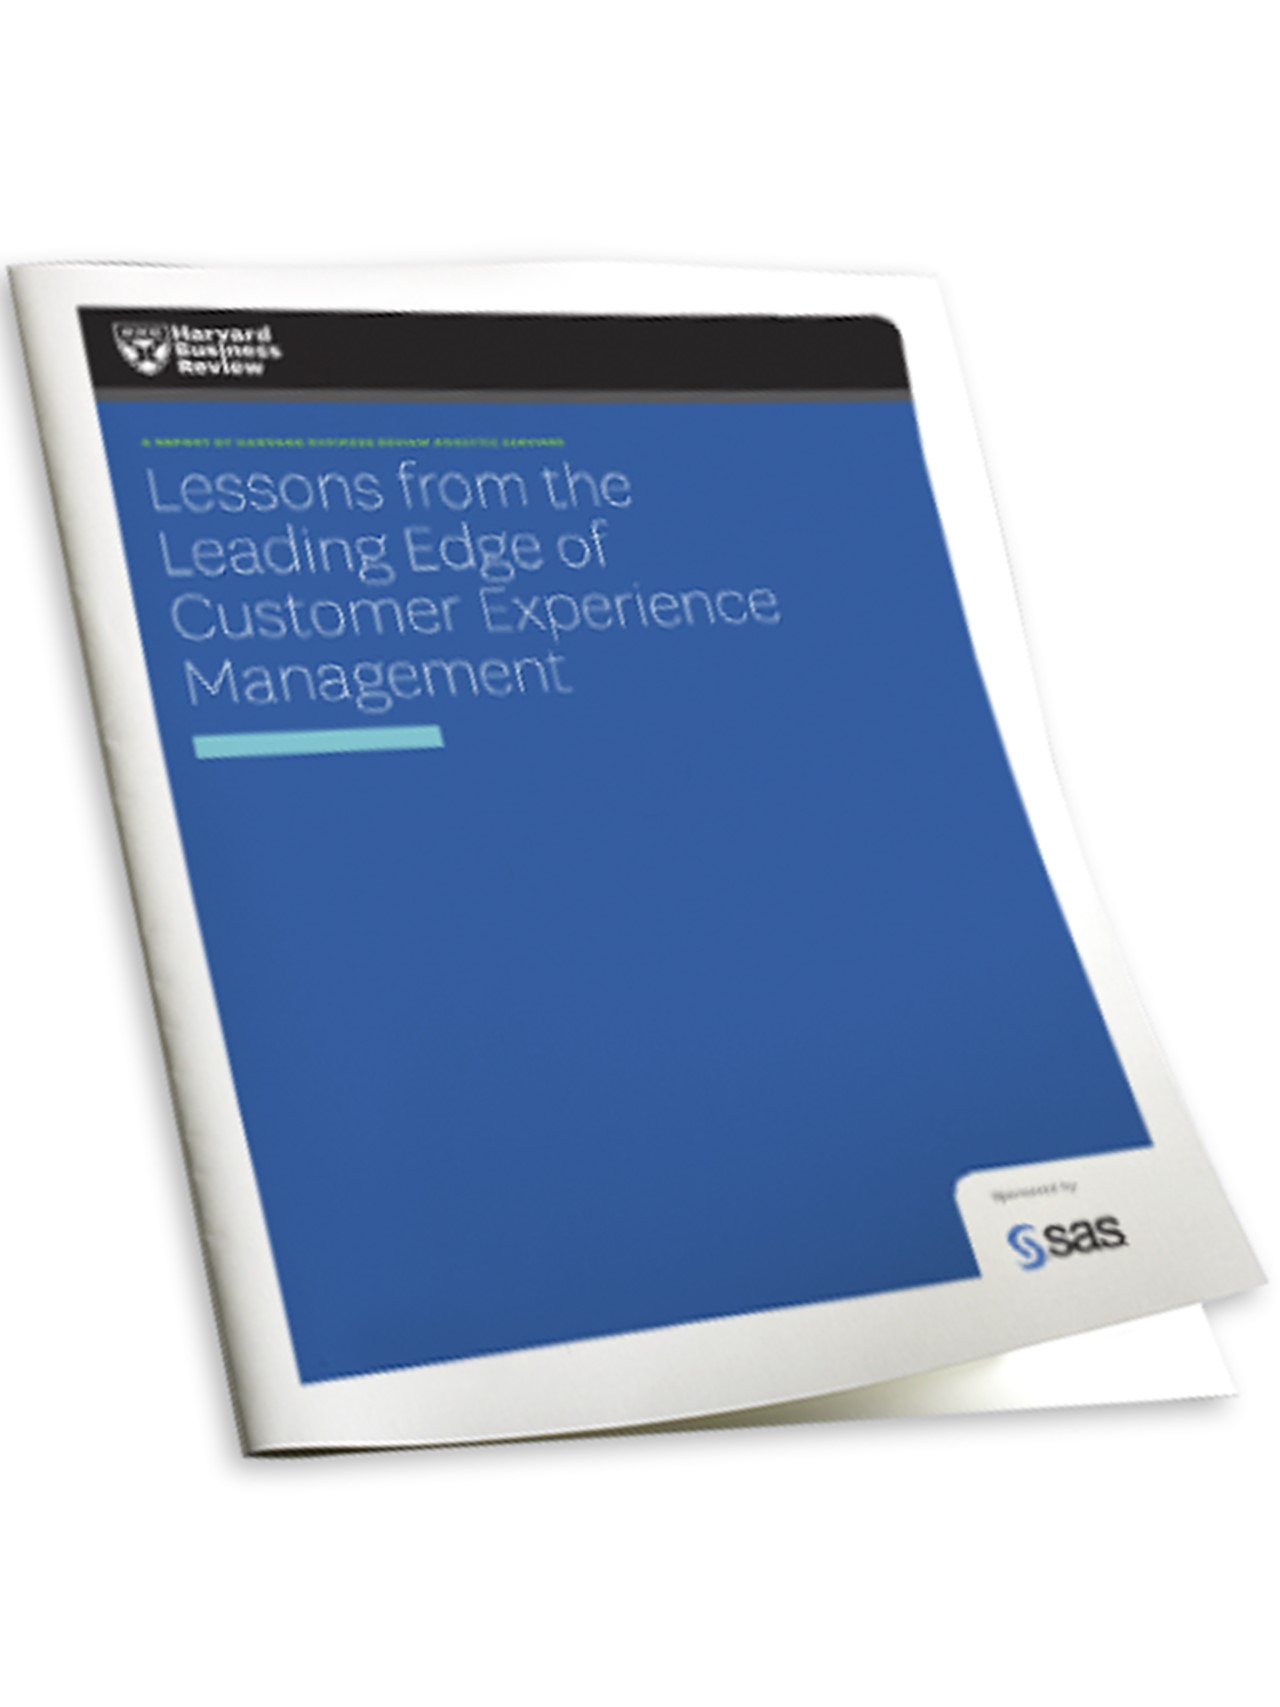 HBR Report: Lessons from the Leading Edge of Customer Experience Management